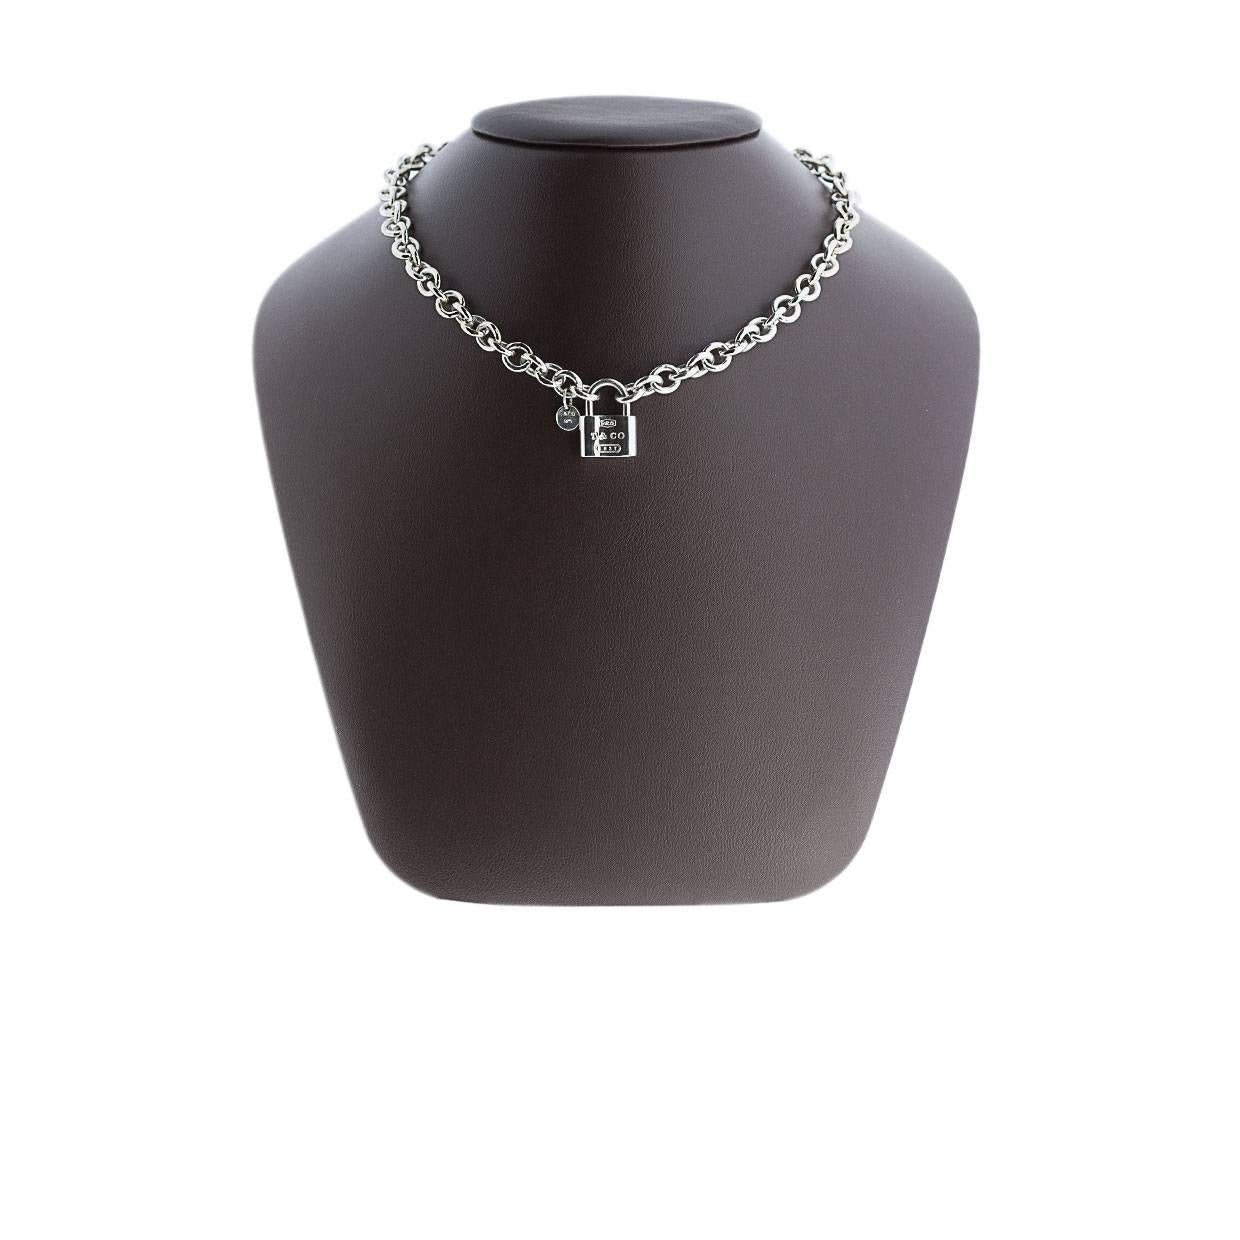 Tiffany & Co have long been revered for their fabulous diamonds & spectacular original designs that are coveted around the world. This stunning Tiffany 1837 lock necklace is no exception! This beautiful sterling silver necklace features a chunky